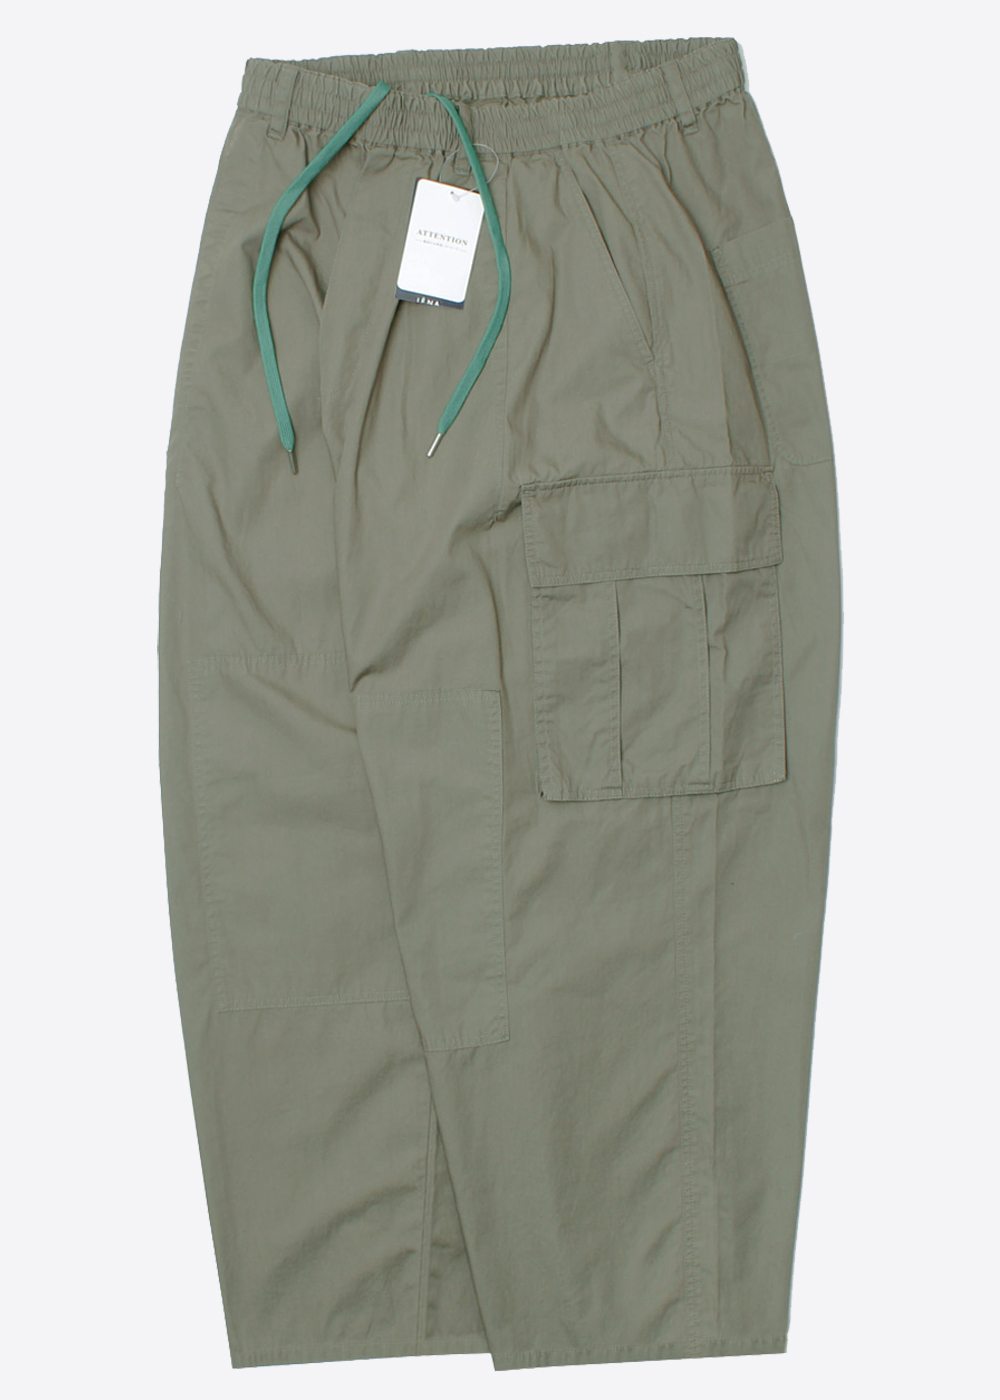 INHERIT BY JOURNAL STANDARD’wide fit’ cotton cargo pant